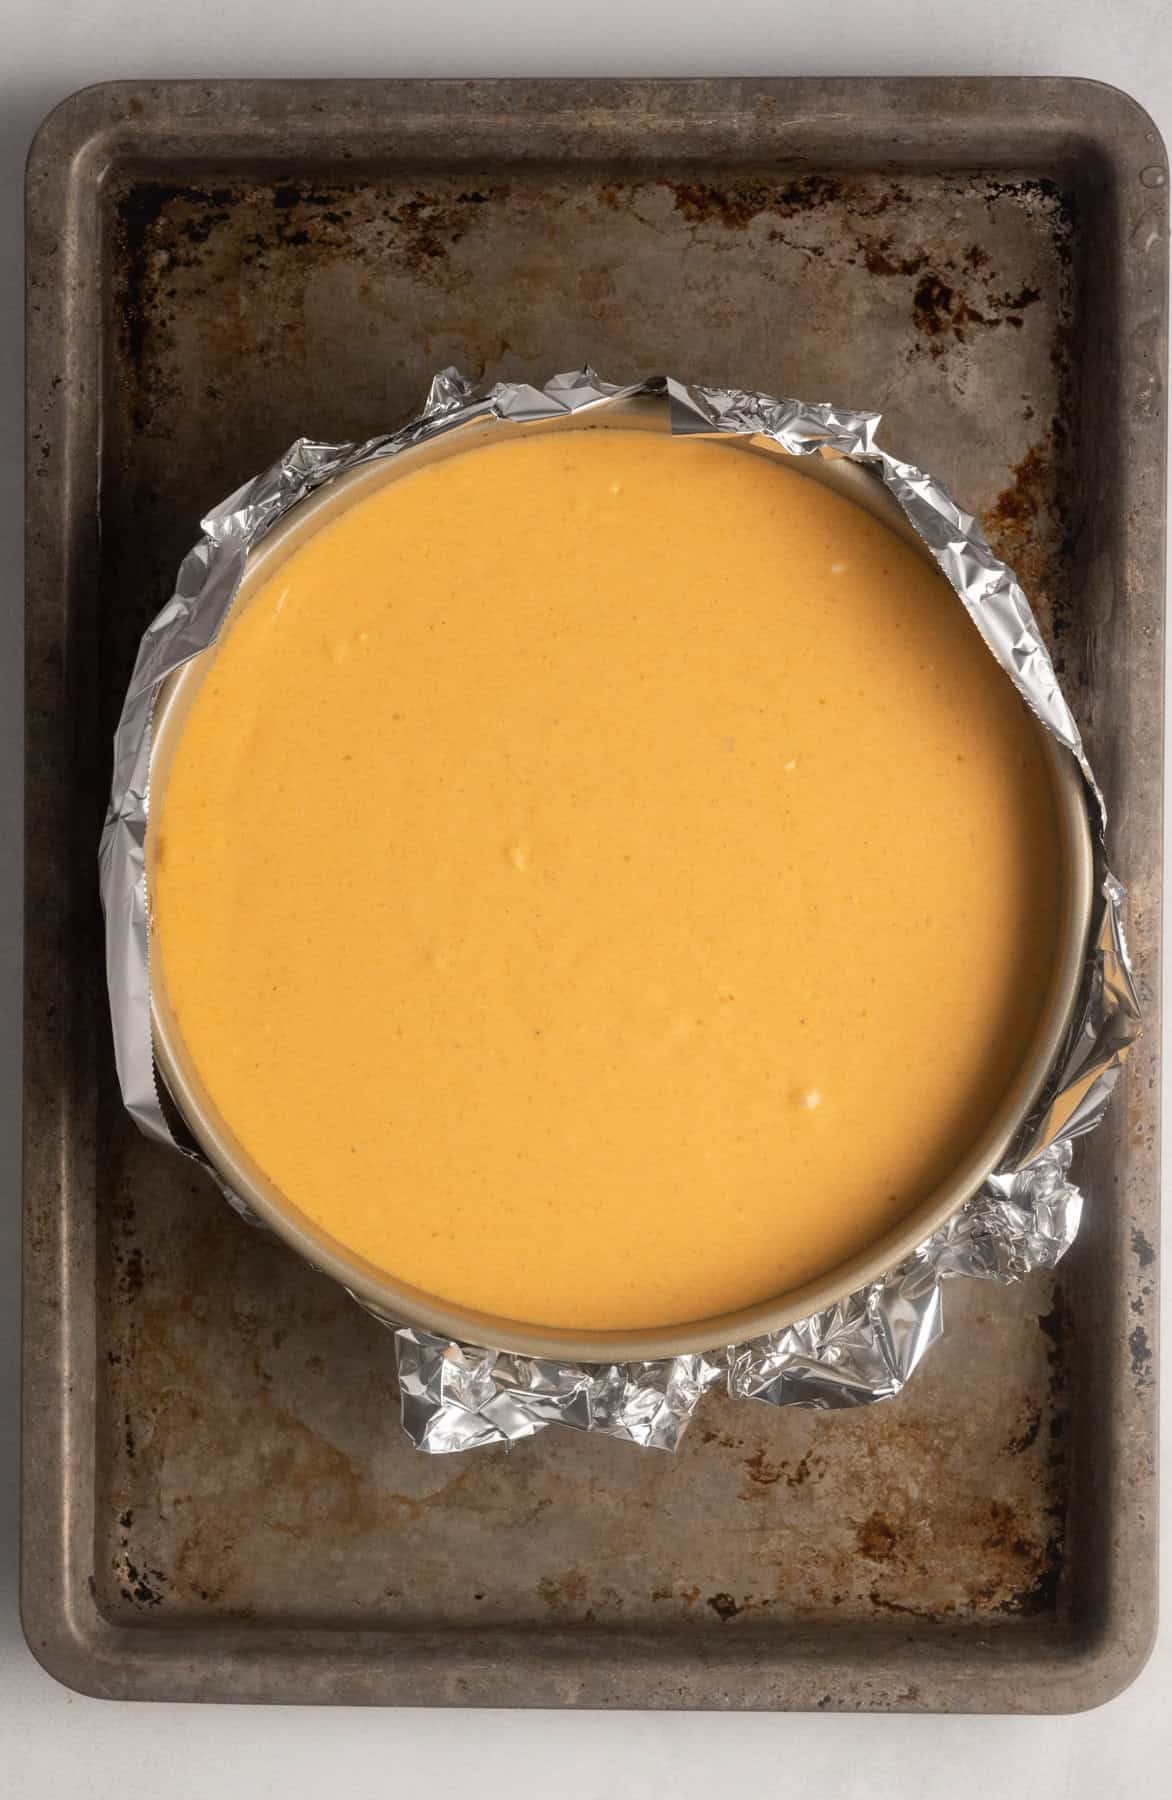 Gluten free pumpkin cheesecake has been added to the springform pan where the crust has been cooling. Water has been added to the sheet pan that the gluten free pumpkin cheesecake sits on. This forms a water bath that allows for more even baking.